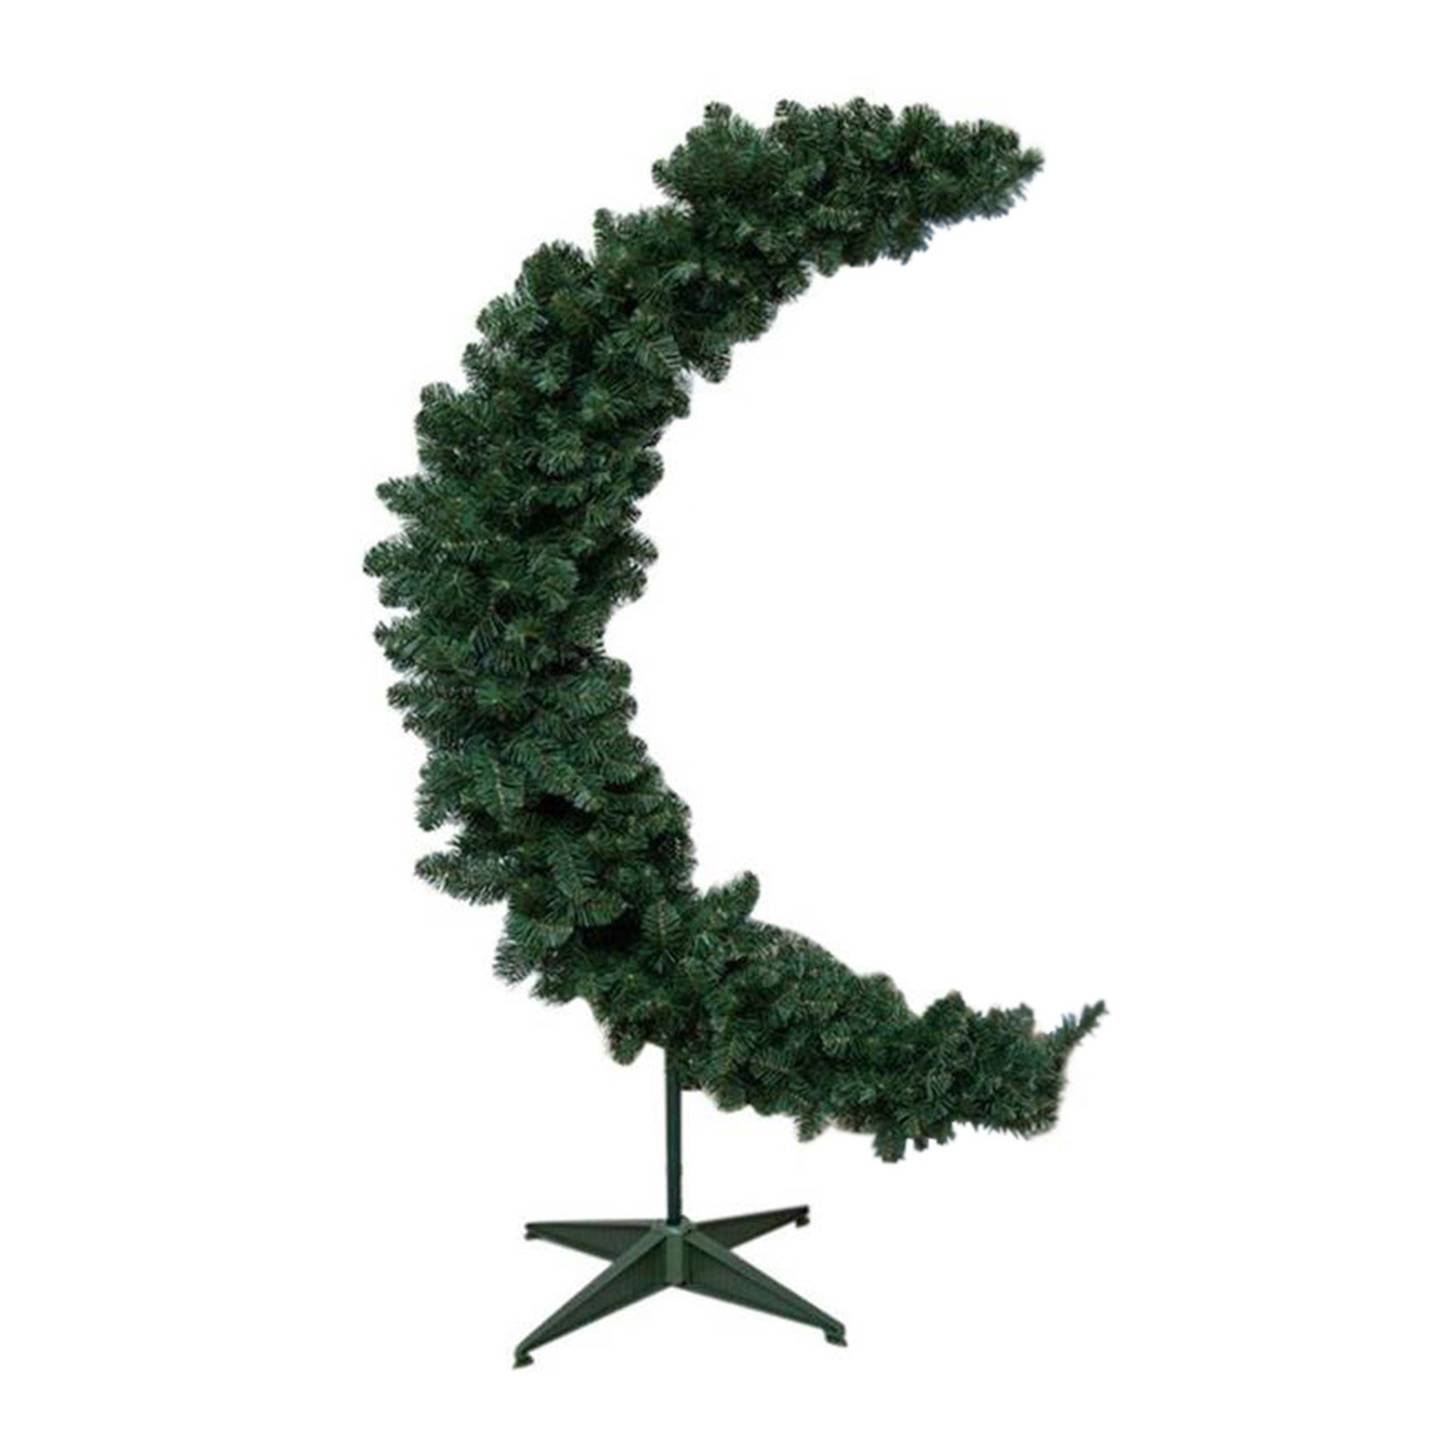 Crescent moon trees can come pre-decorated, or you can decorate the tree with your family. Photo: Crate & Barrel